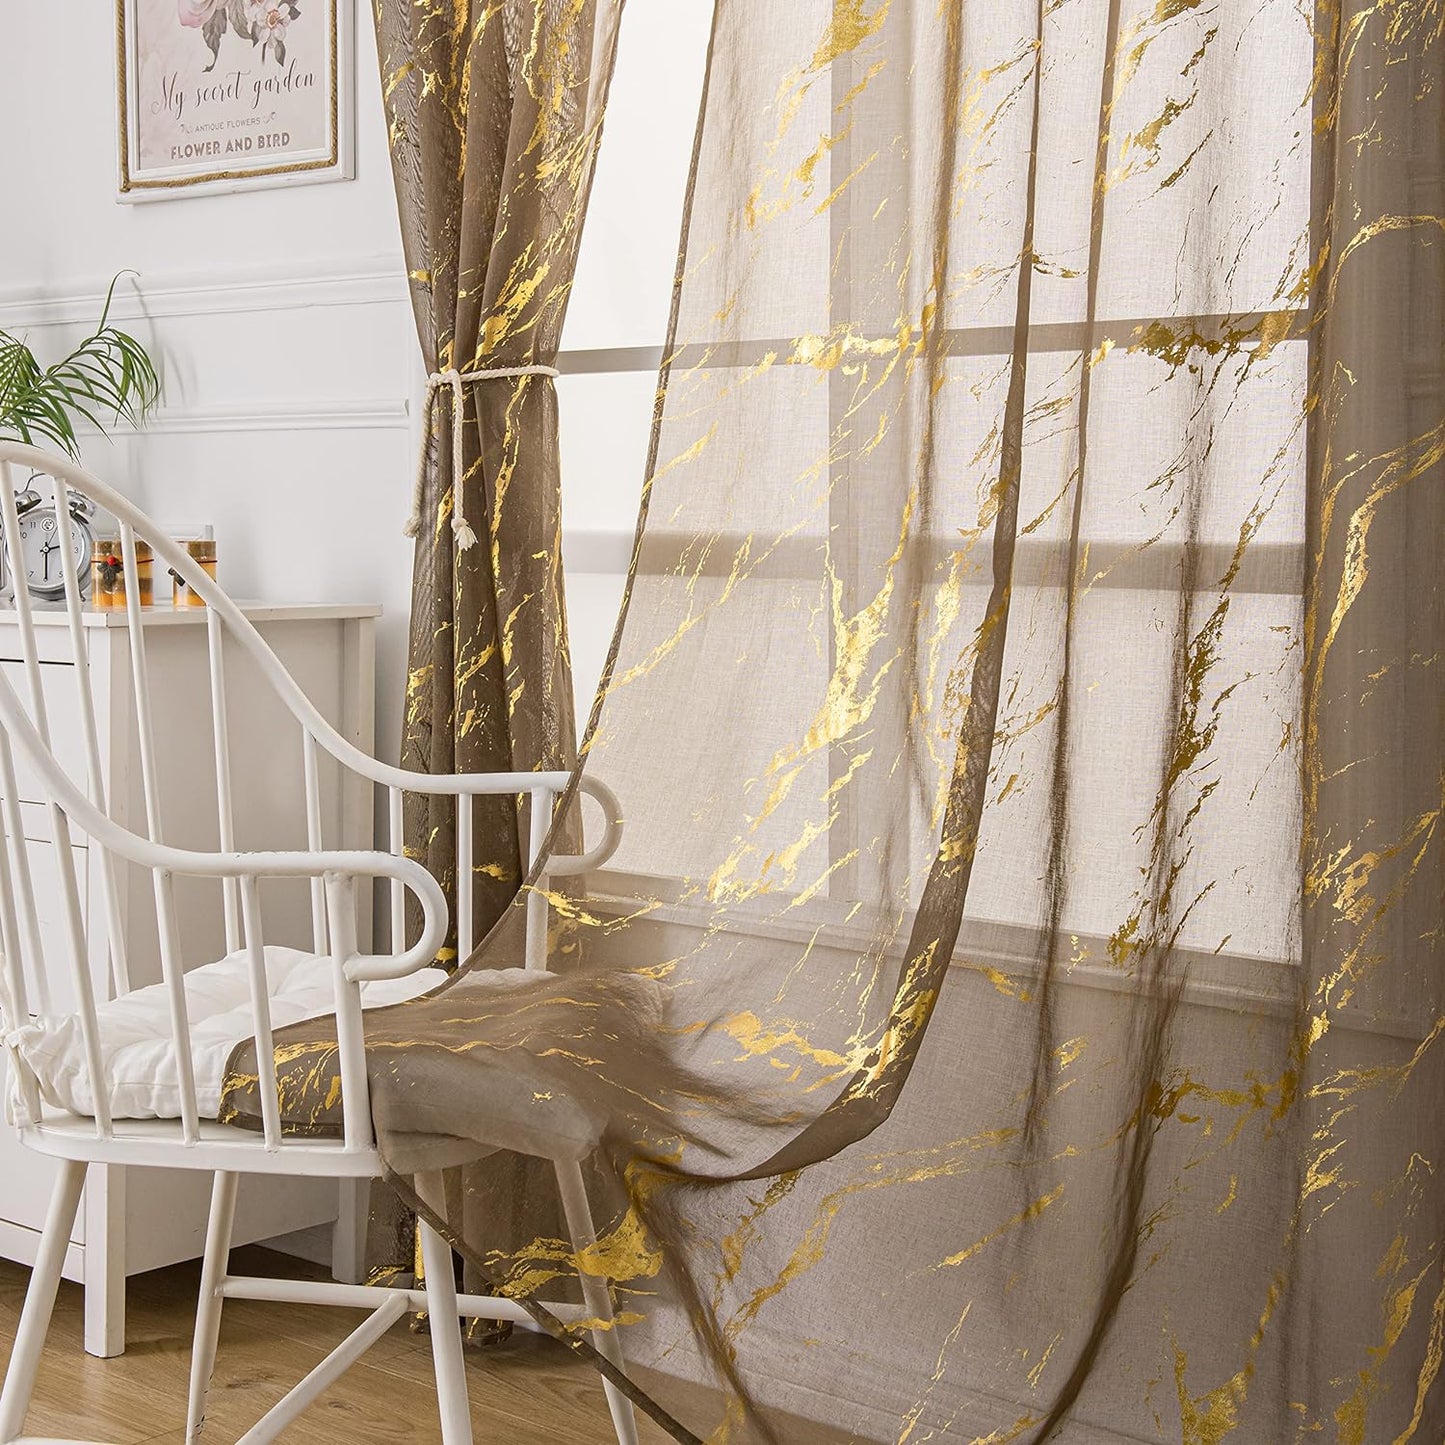 Sutuo Home Marble White Sheer Curtains 84 Inch Length, Gold Foil Print Metallic Bronzing, Privacy Window Treatment Decor Abstract Drape Pair 2 Panels Set for Bedroom Kitchen Living Room 52" W X 84" L  Sutuo Home Gold And Taupe 52" W X 96" L, 2 Panels 